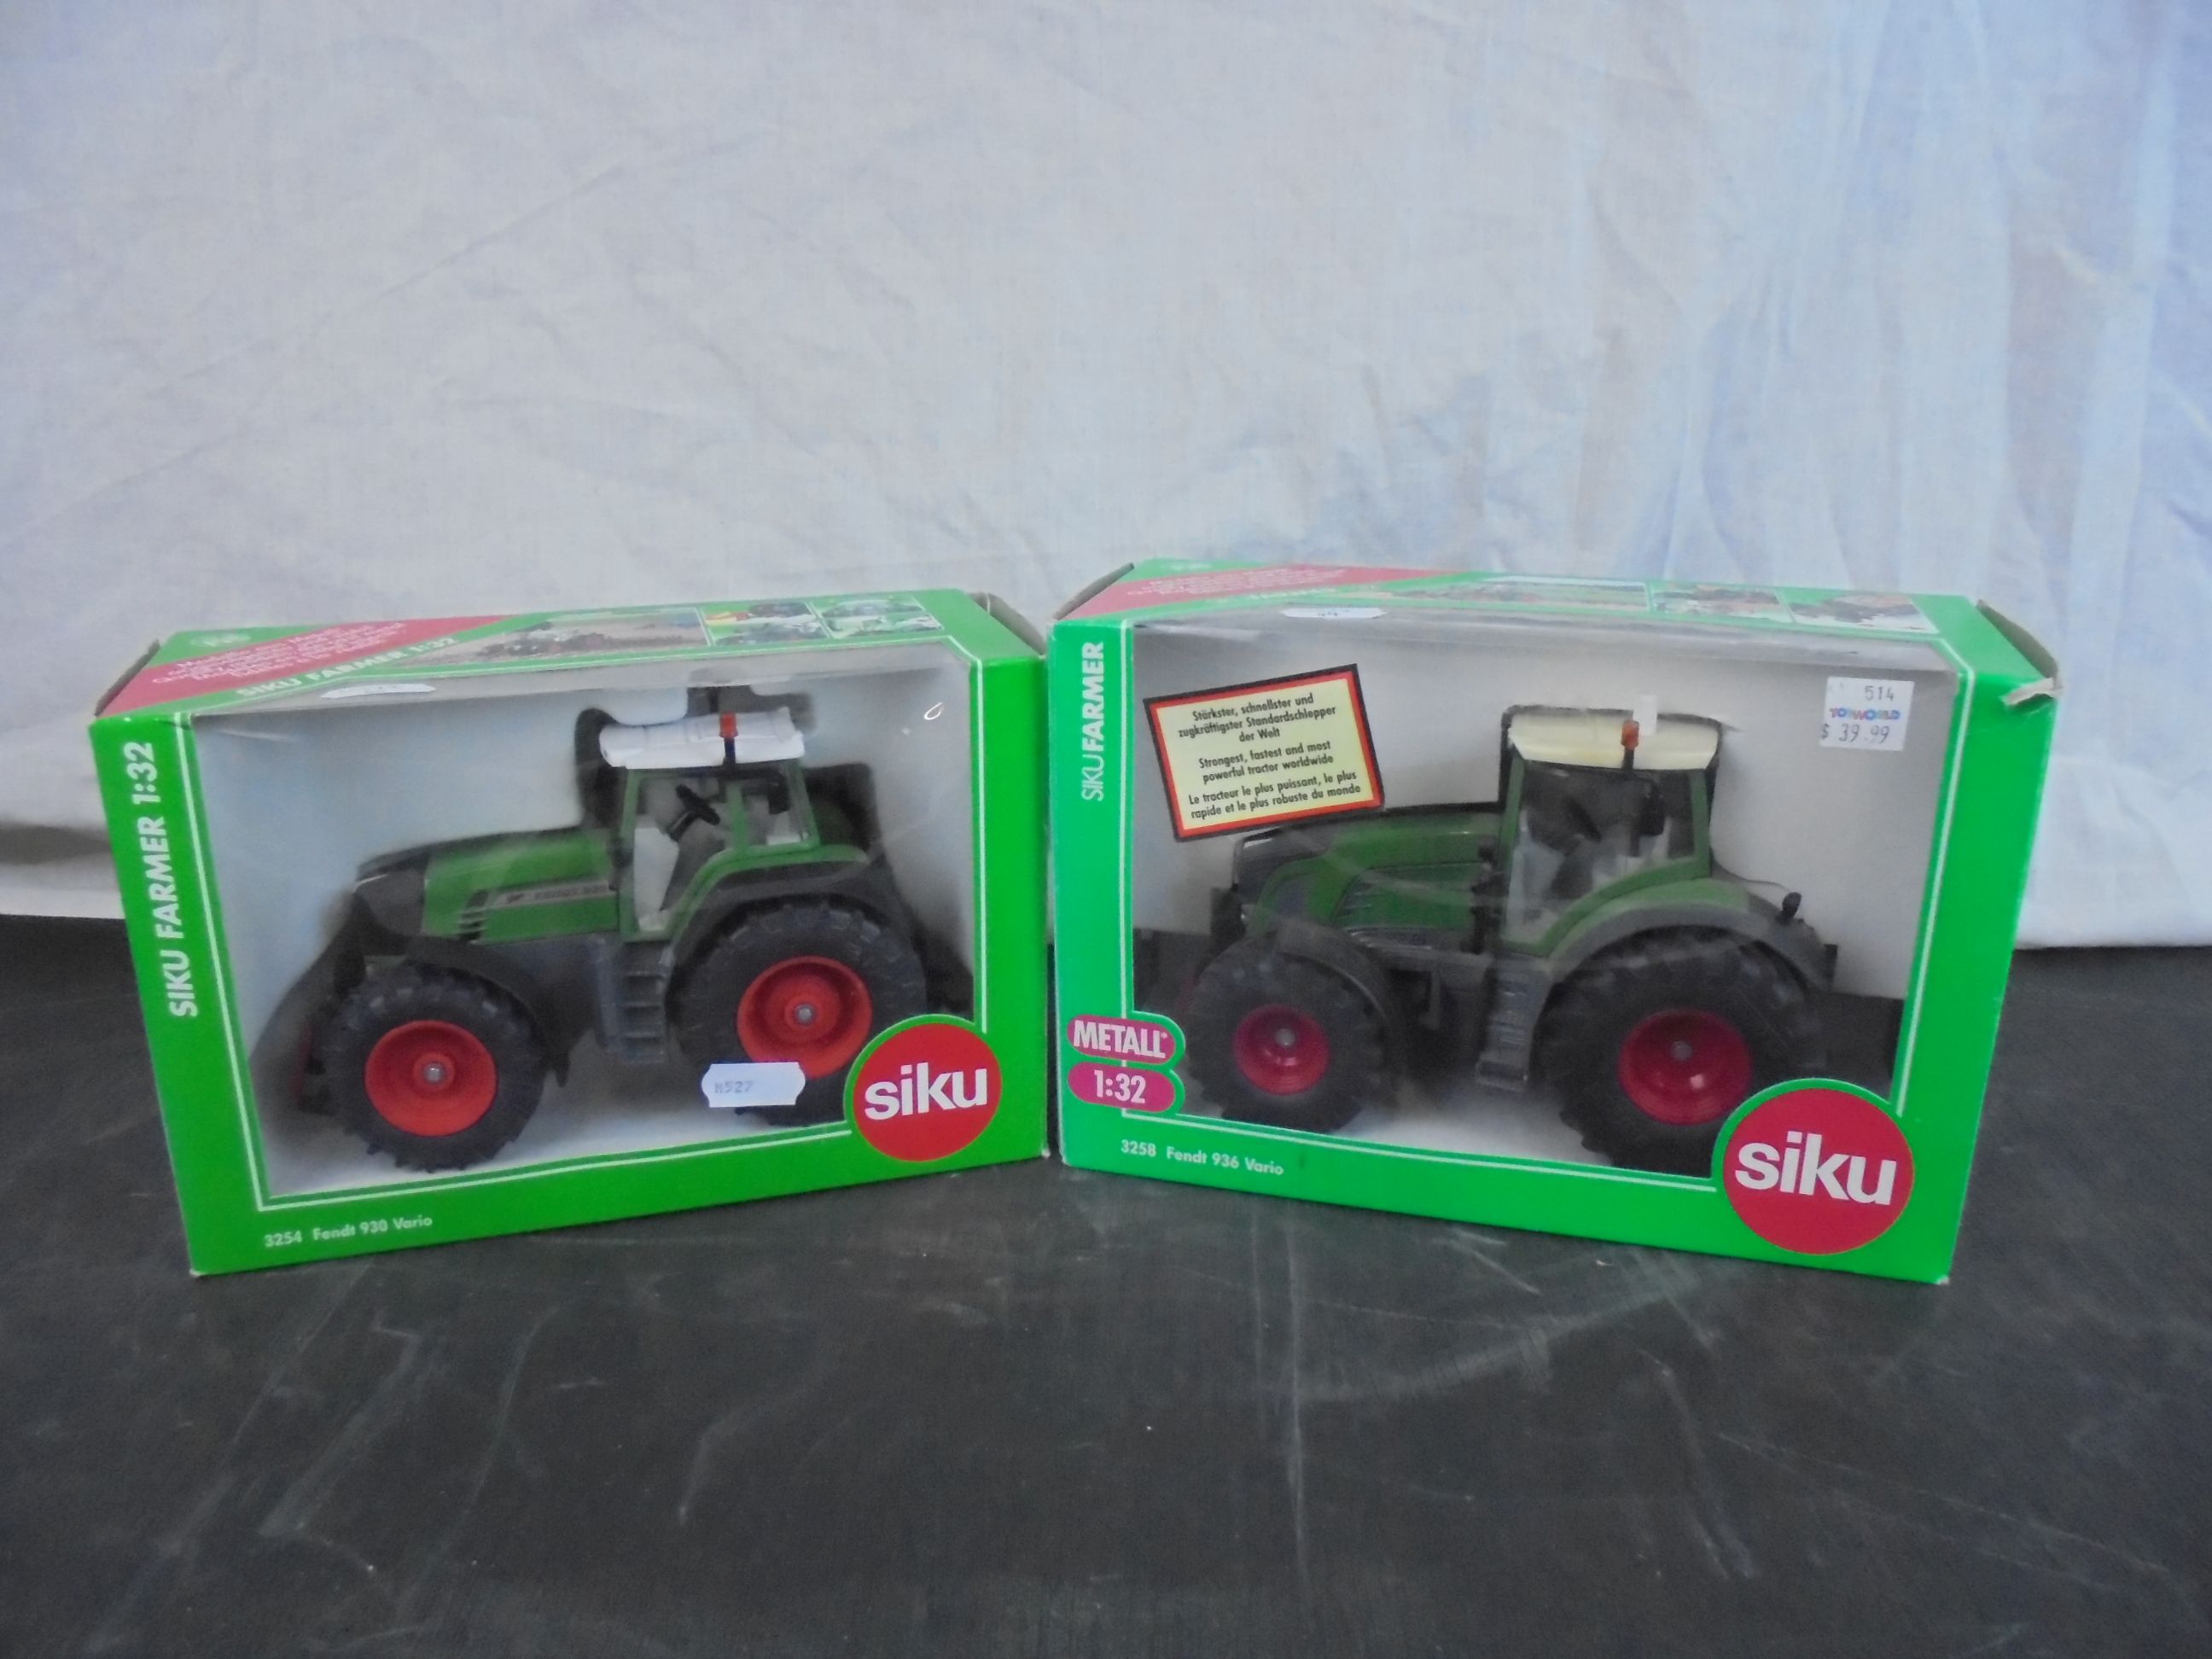 11 Boxed Siku 1/32 farming models, mainly tractors, to include 3254 x 2, 3258, 3263, 2965, 2968, - Image 5 of 5